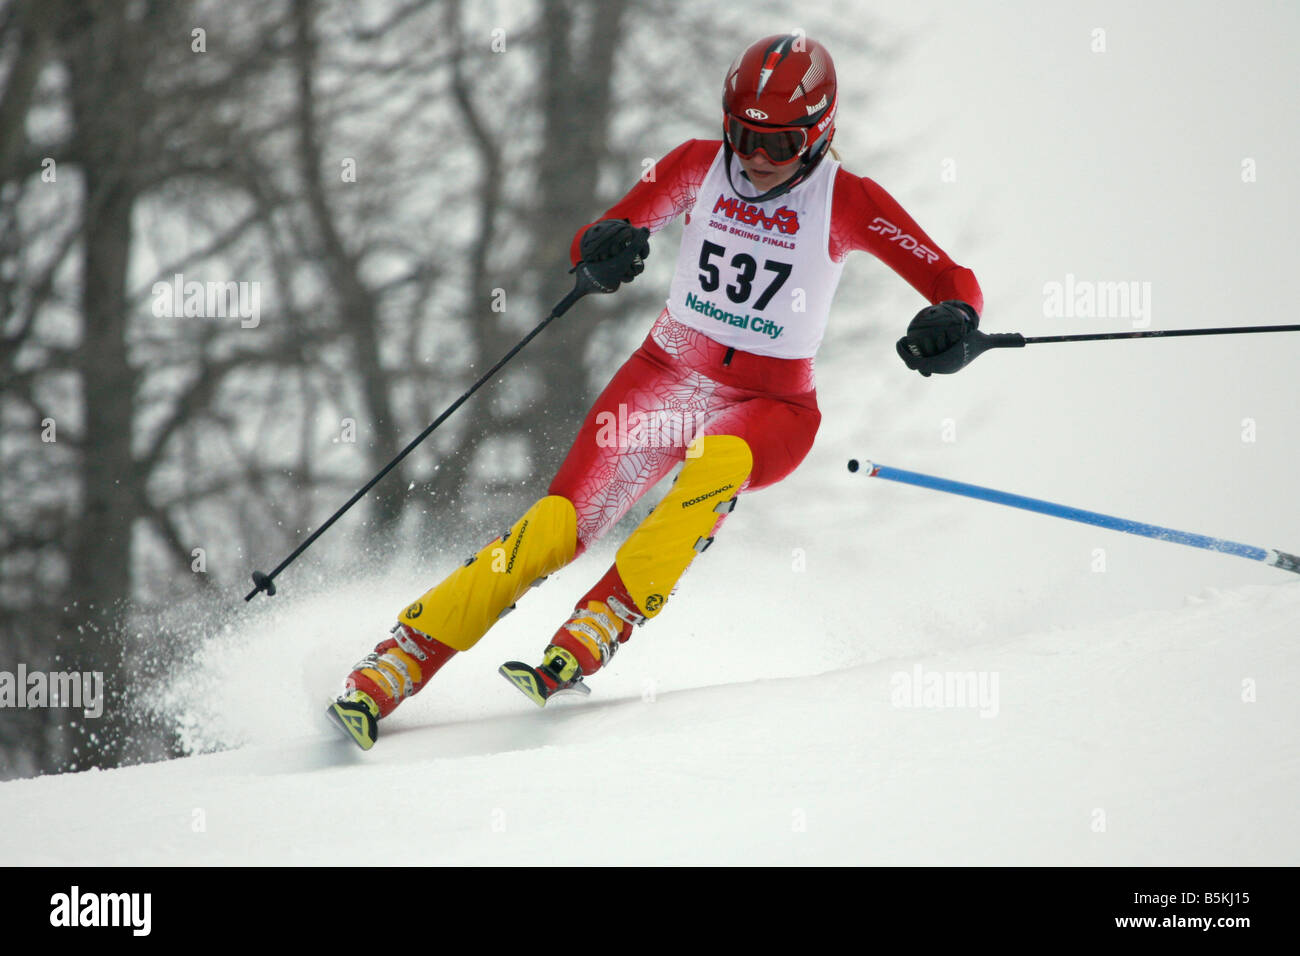 Teenage girl skier at a gate in an alpine slalom race. Stock Photo